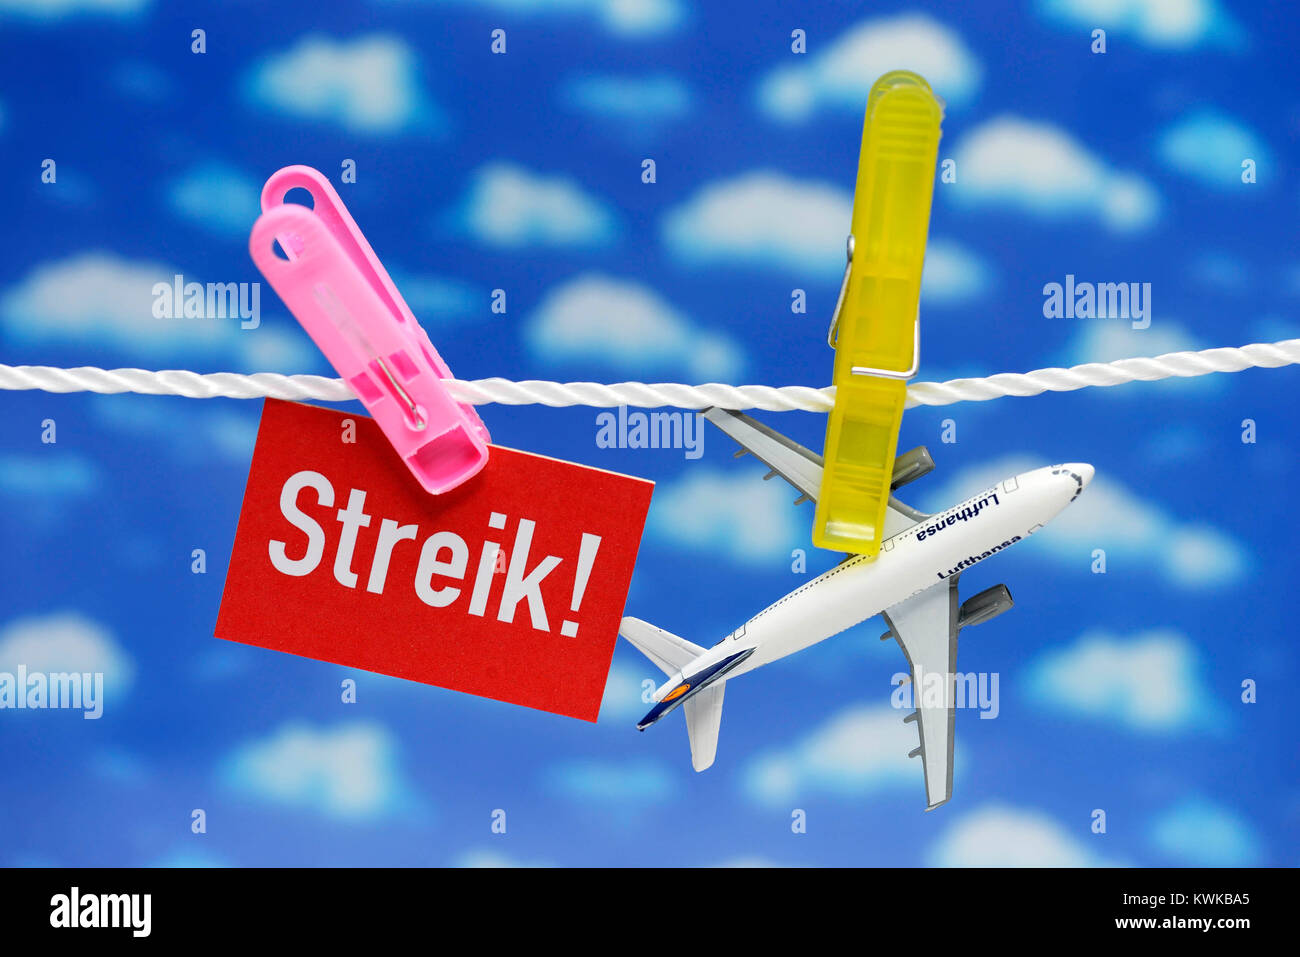 Token Streik High Resolution Stock Photography and Images - Alamy